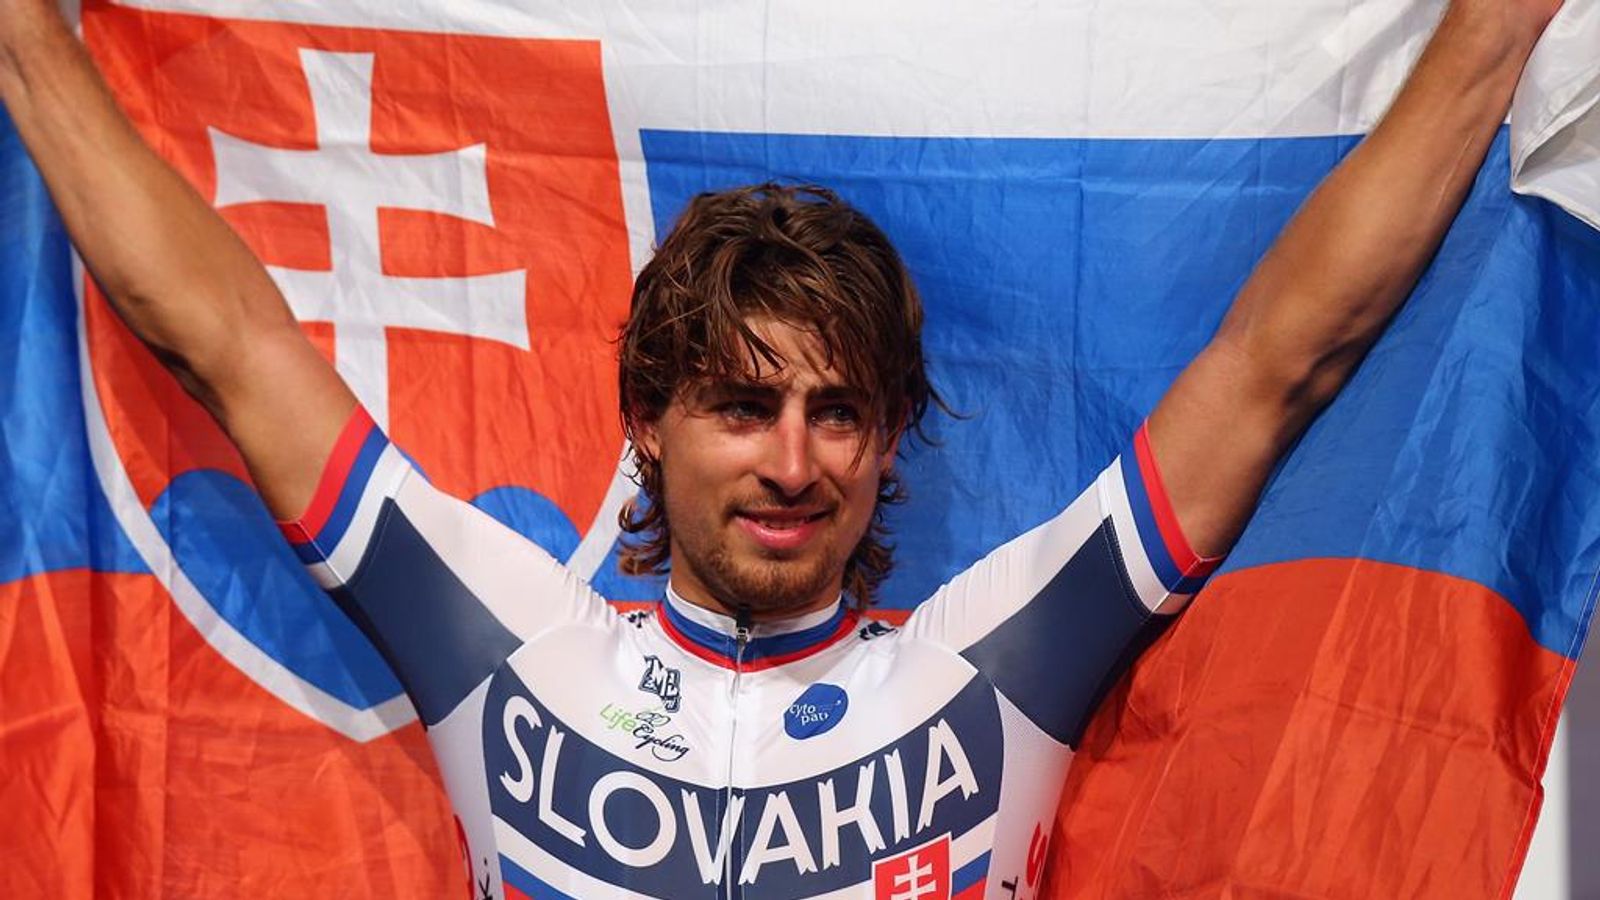 Peter Sagan's World Championship win was a victory for cycling ...